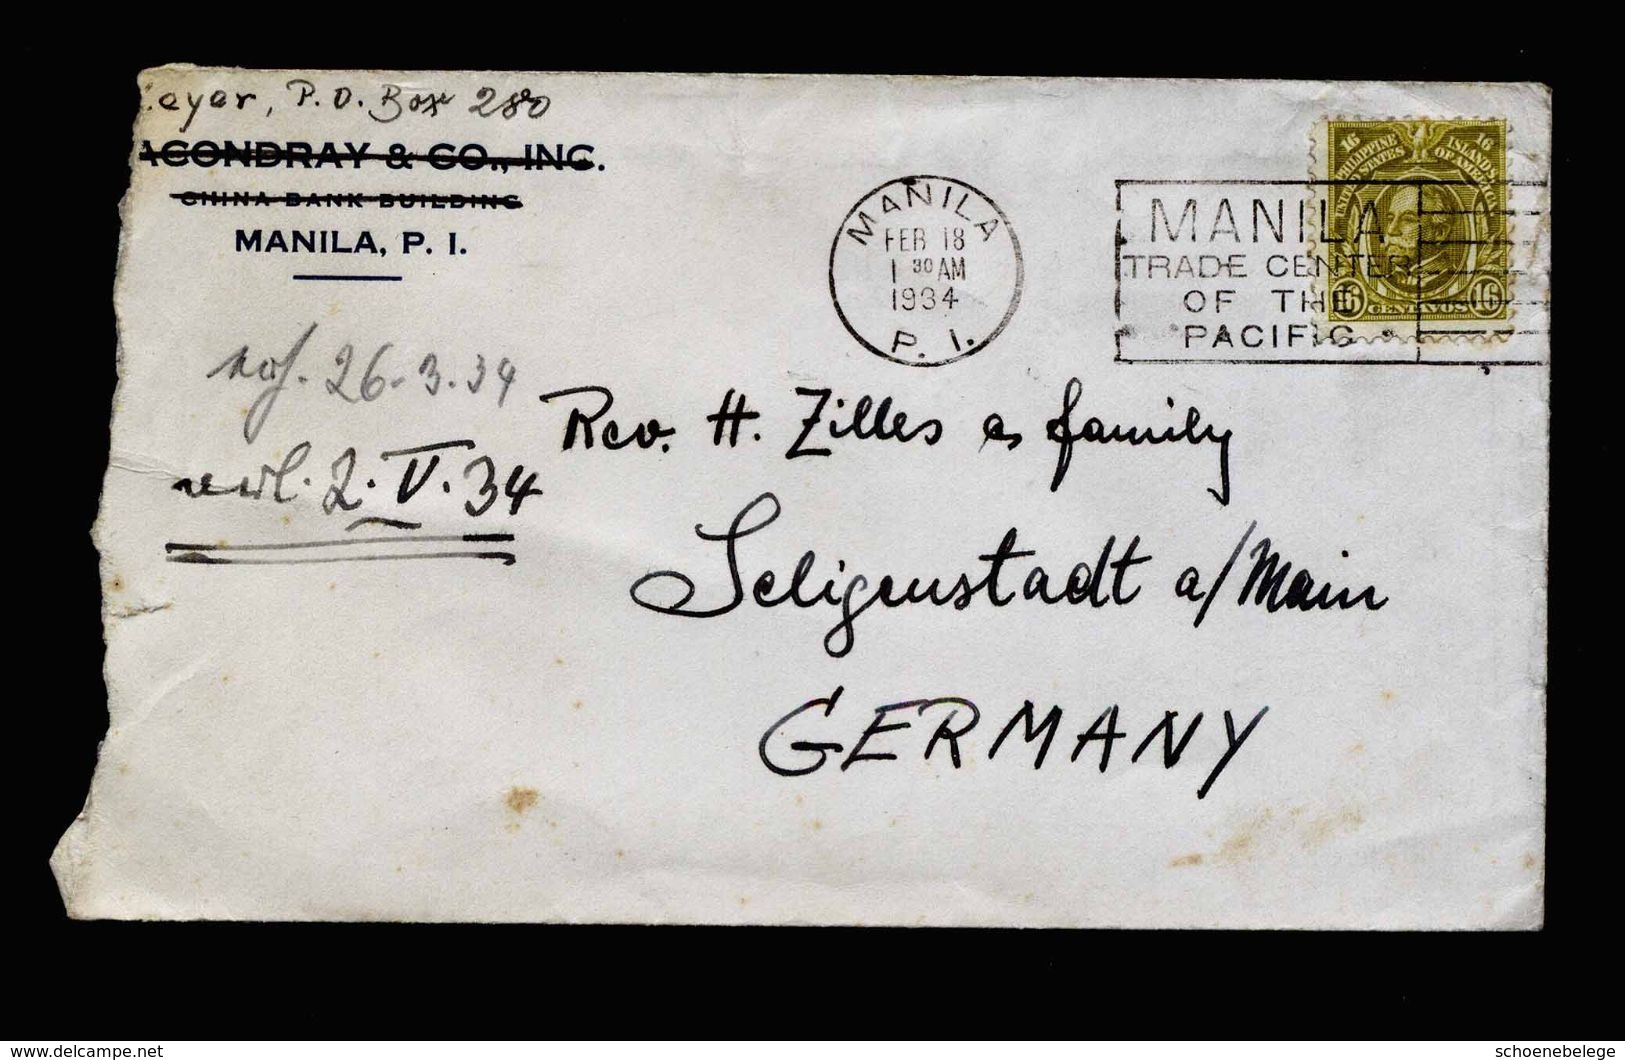 A5141) US Philipppines Cover Manila 02/18/34 With 16c To Germany - Philippines